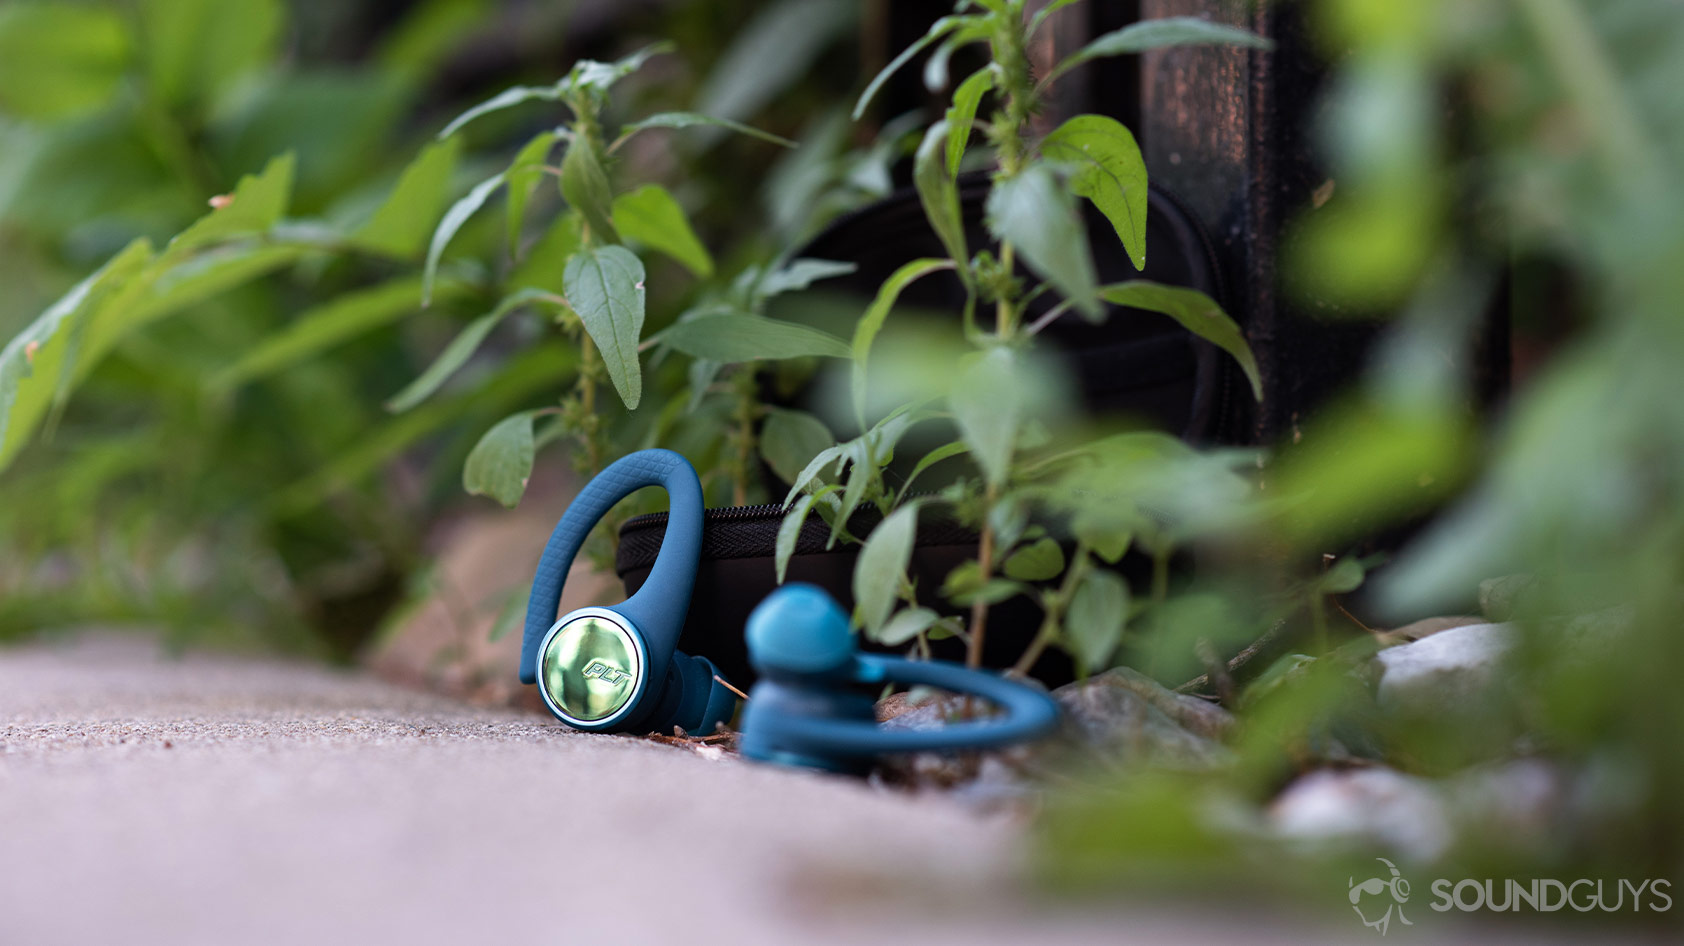 A picture of the Plantronics BackBeat FIT 3200-true wireless workout earbuds outside in front of green foliage peeking through a fence.